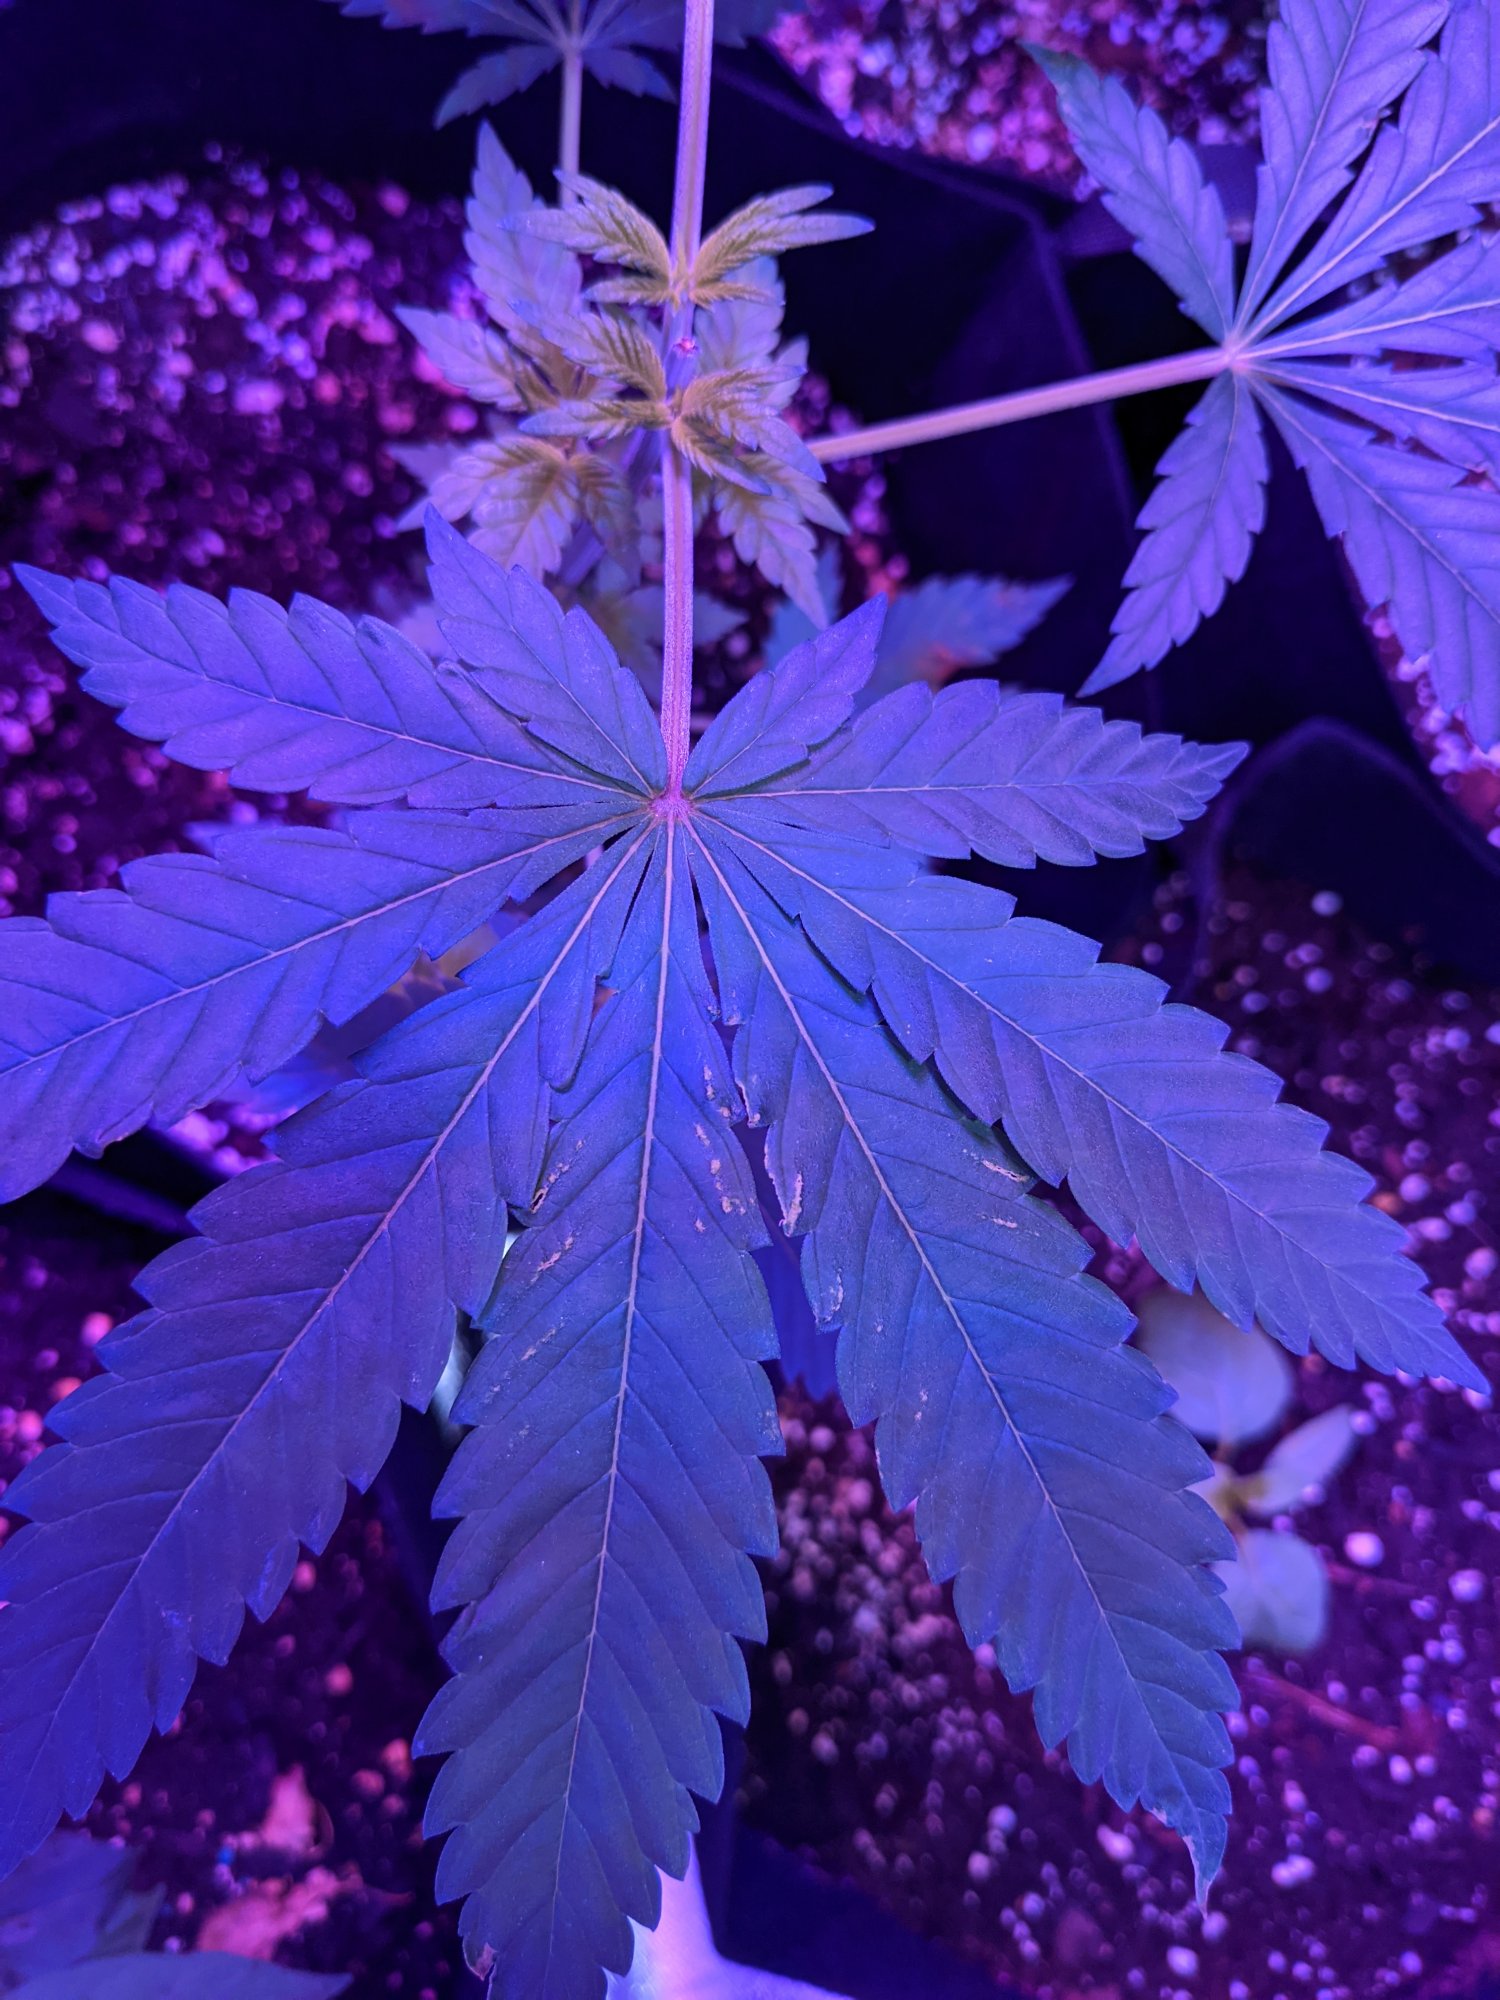 Is this nutrient burn or lock out 3